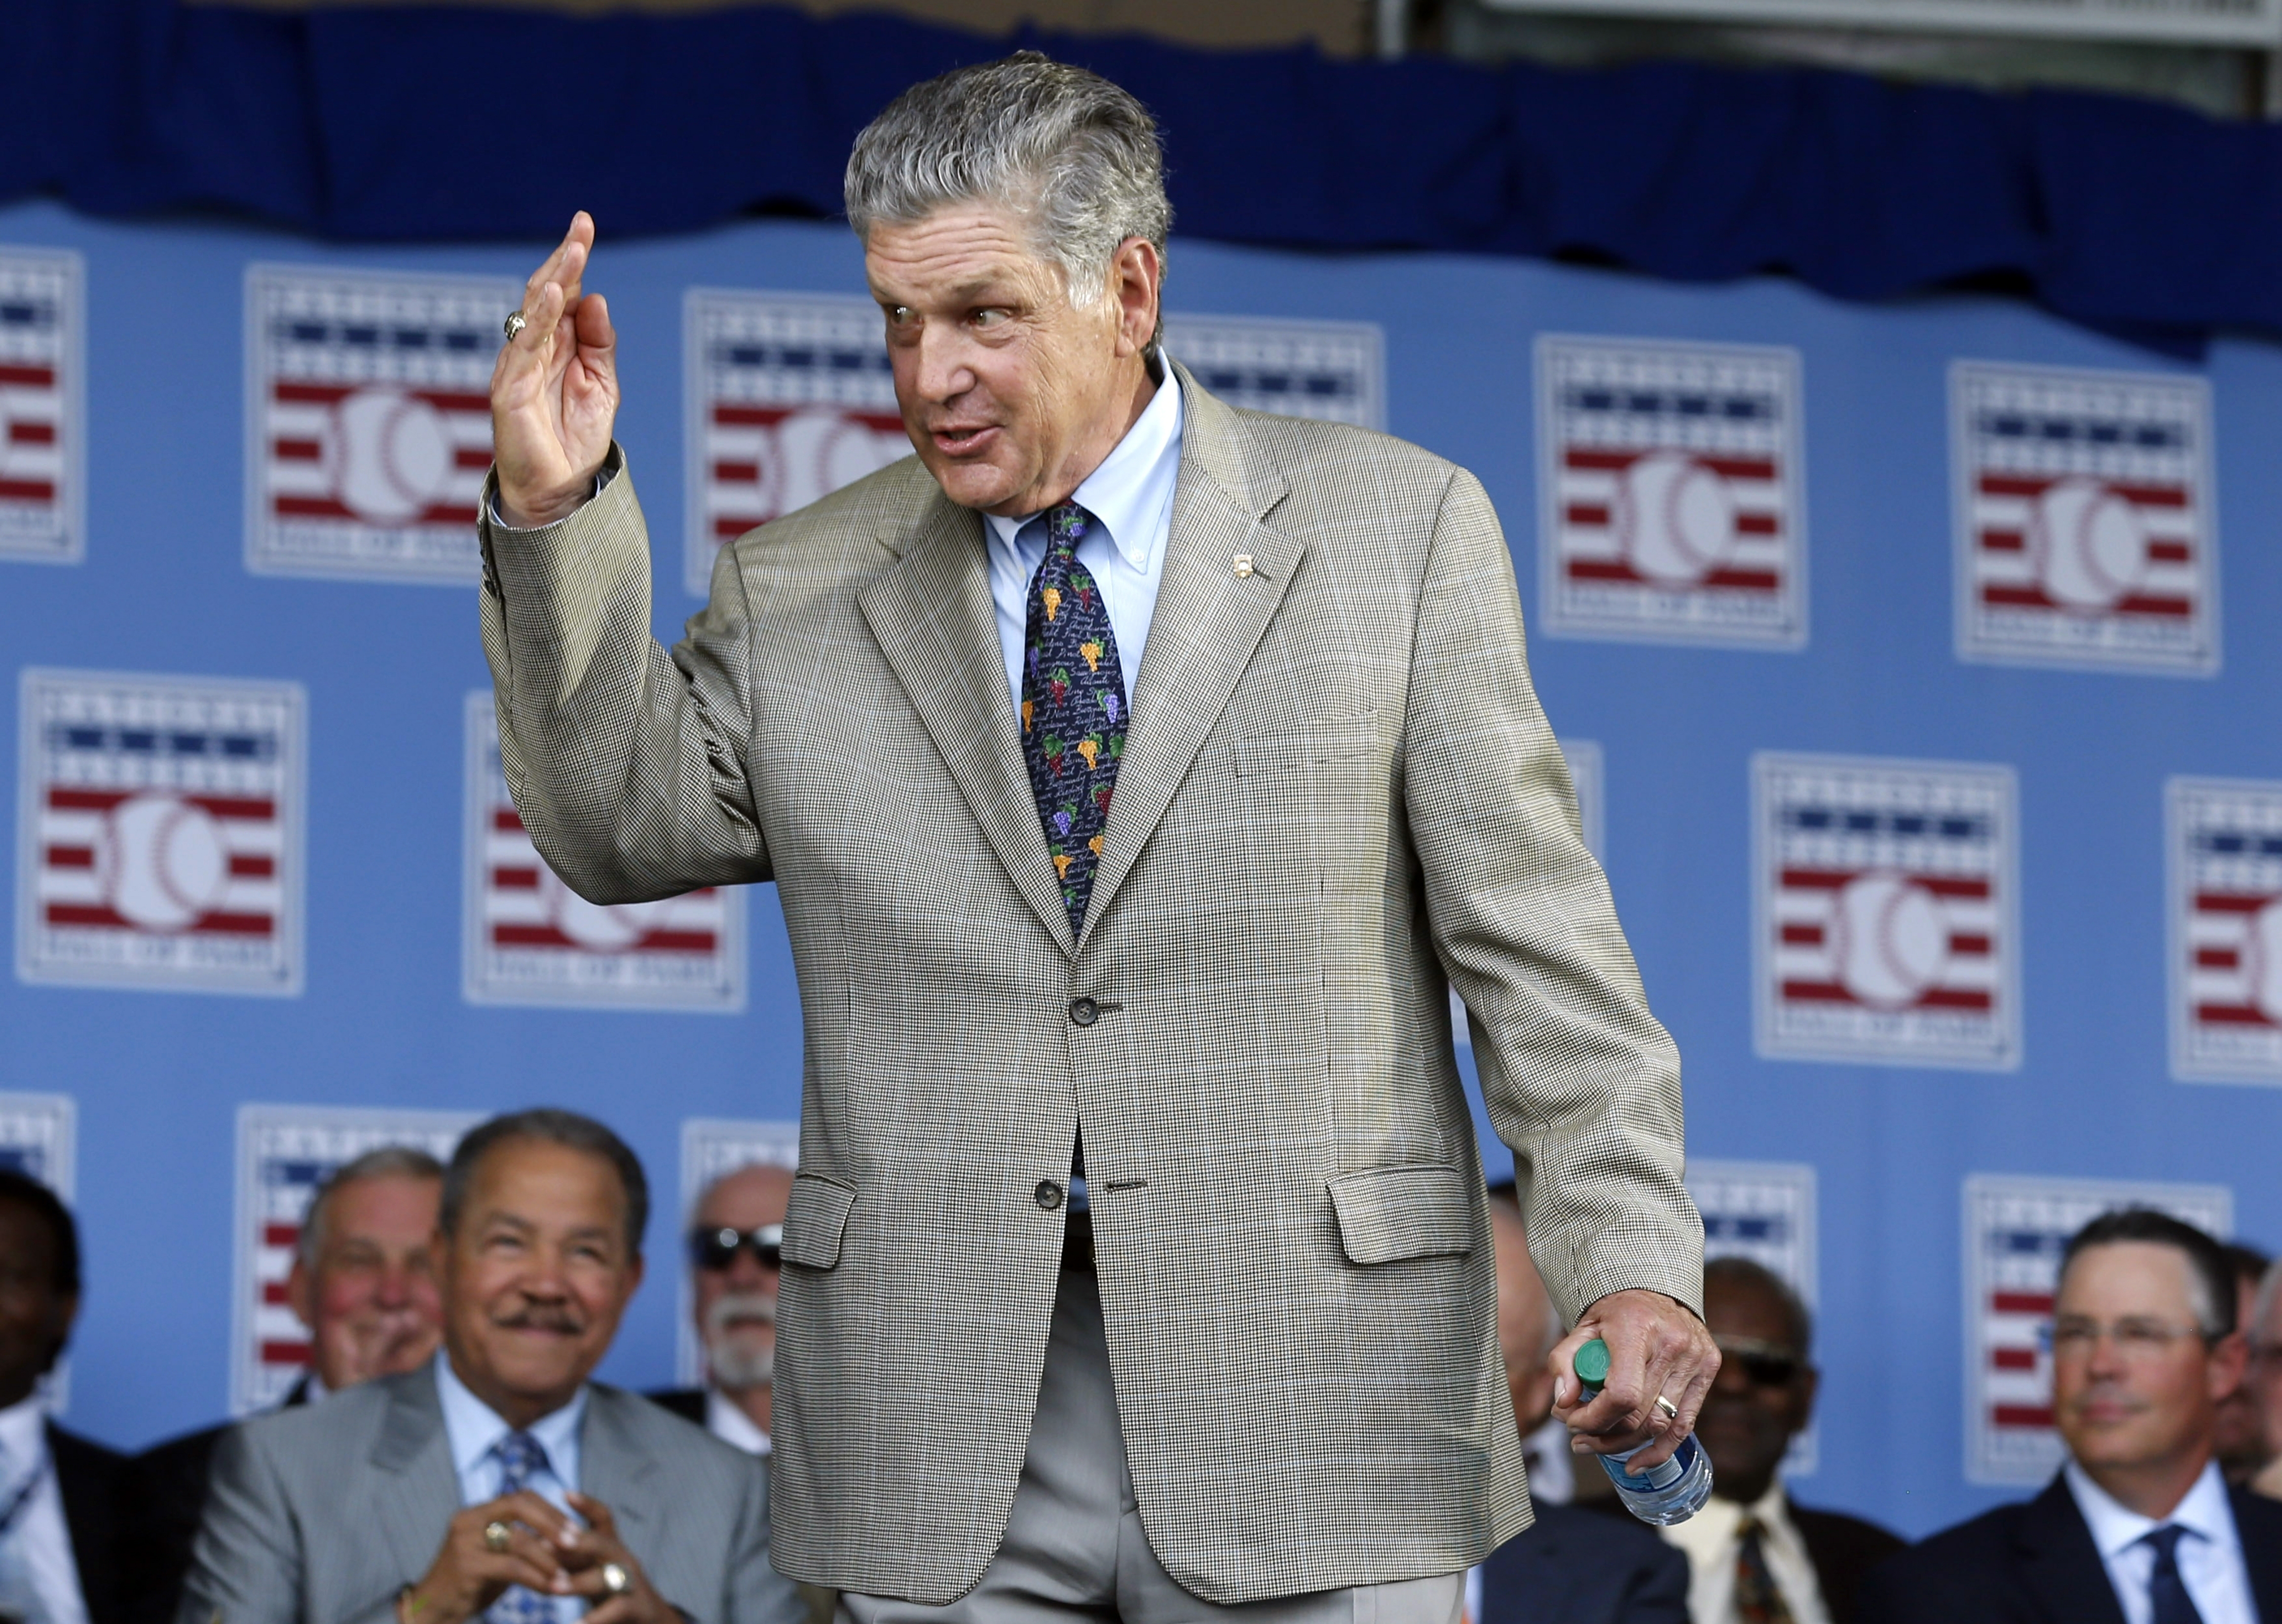 Mets’ great Tom Seaver diagnosed with dementia at 74